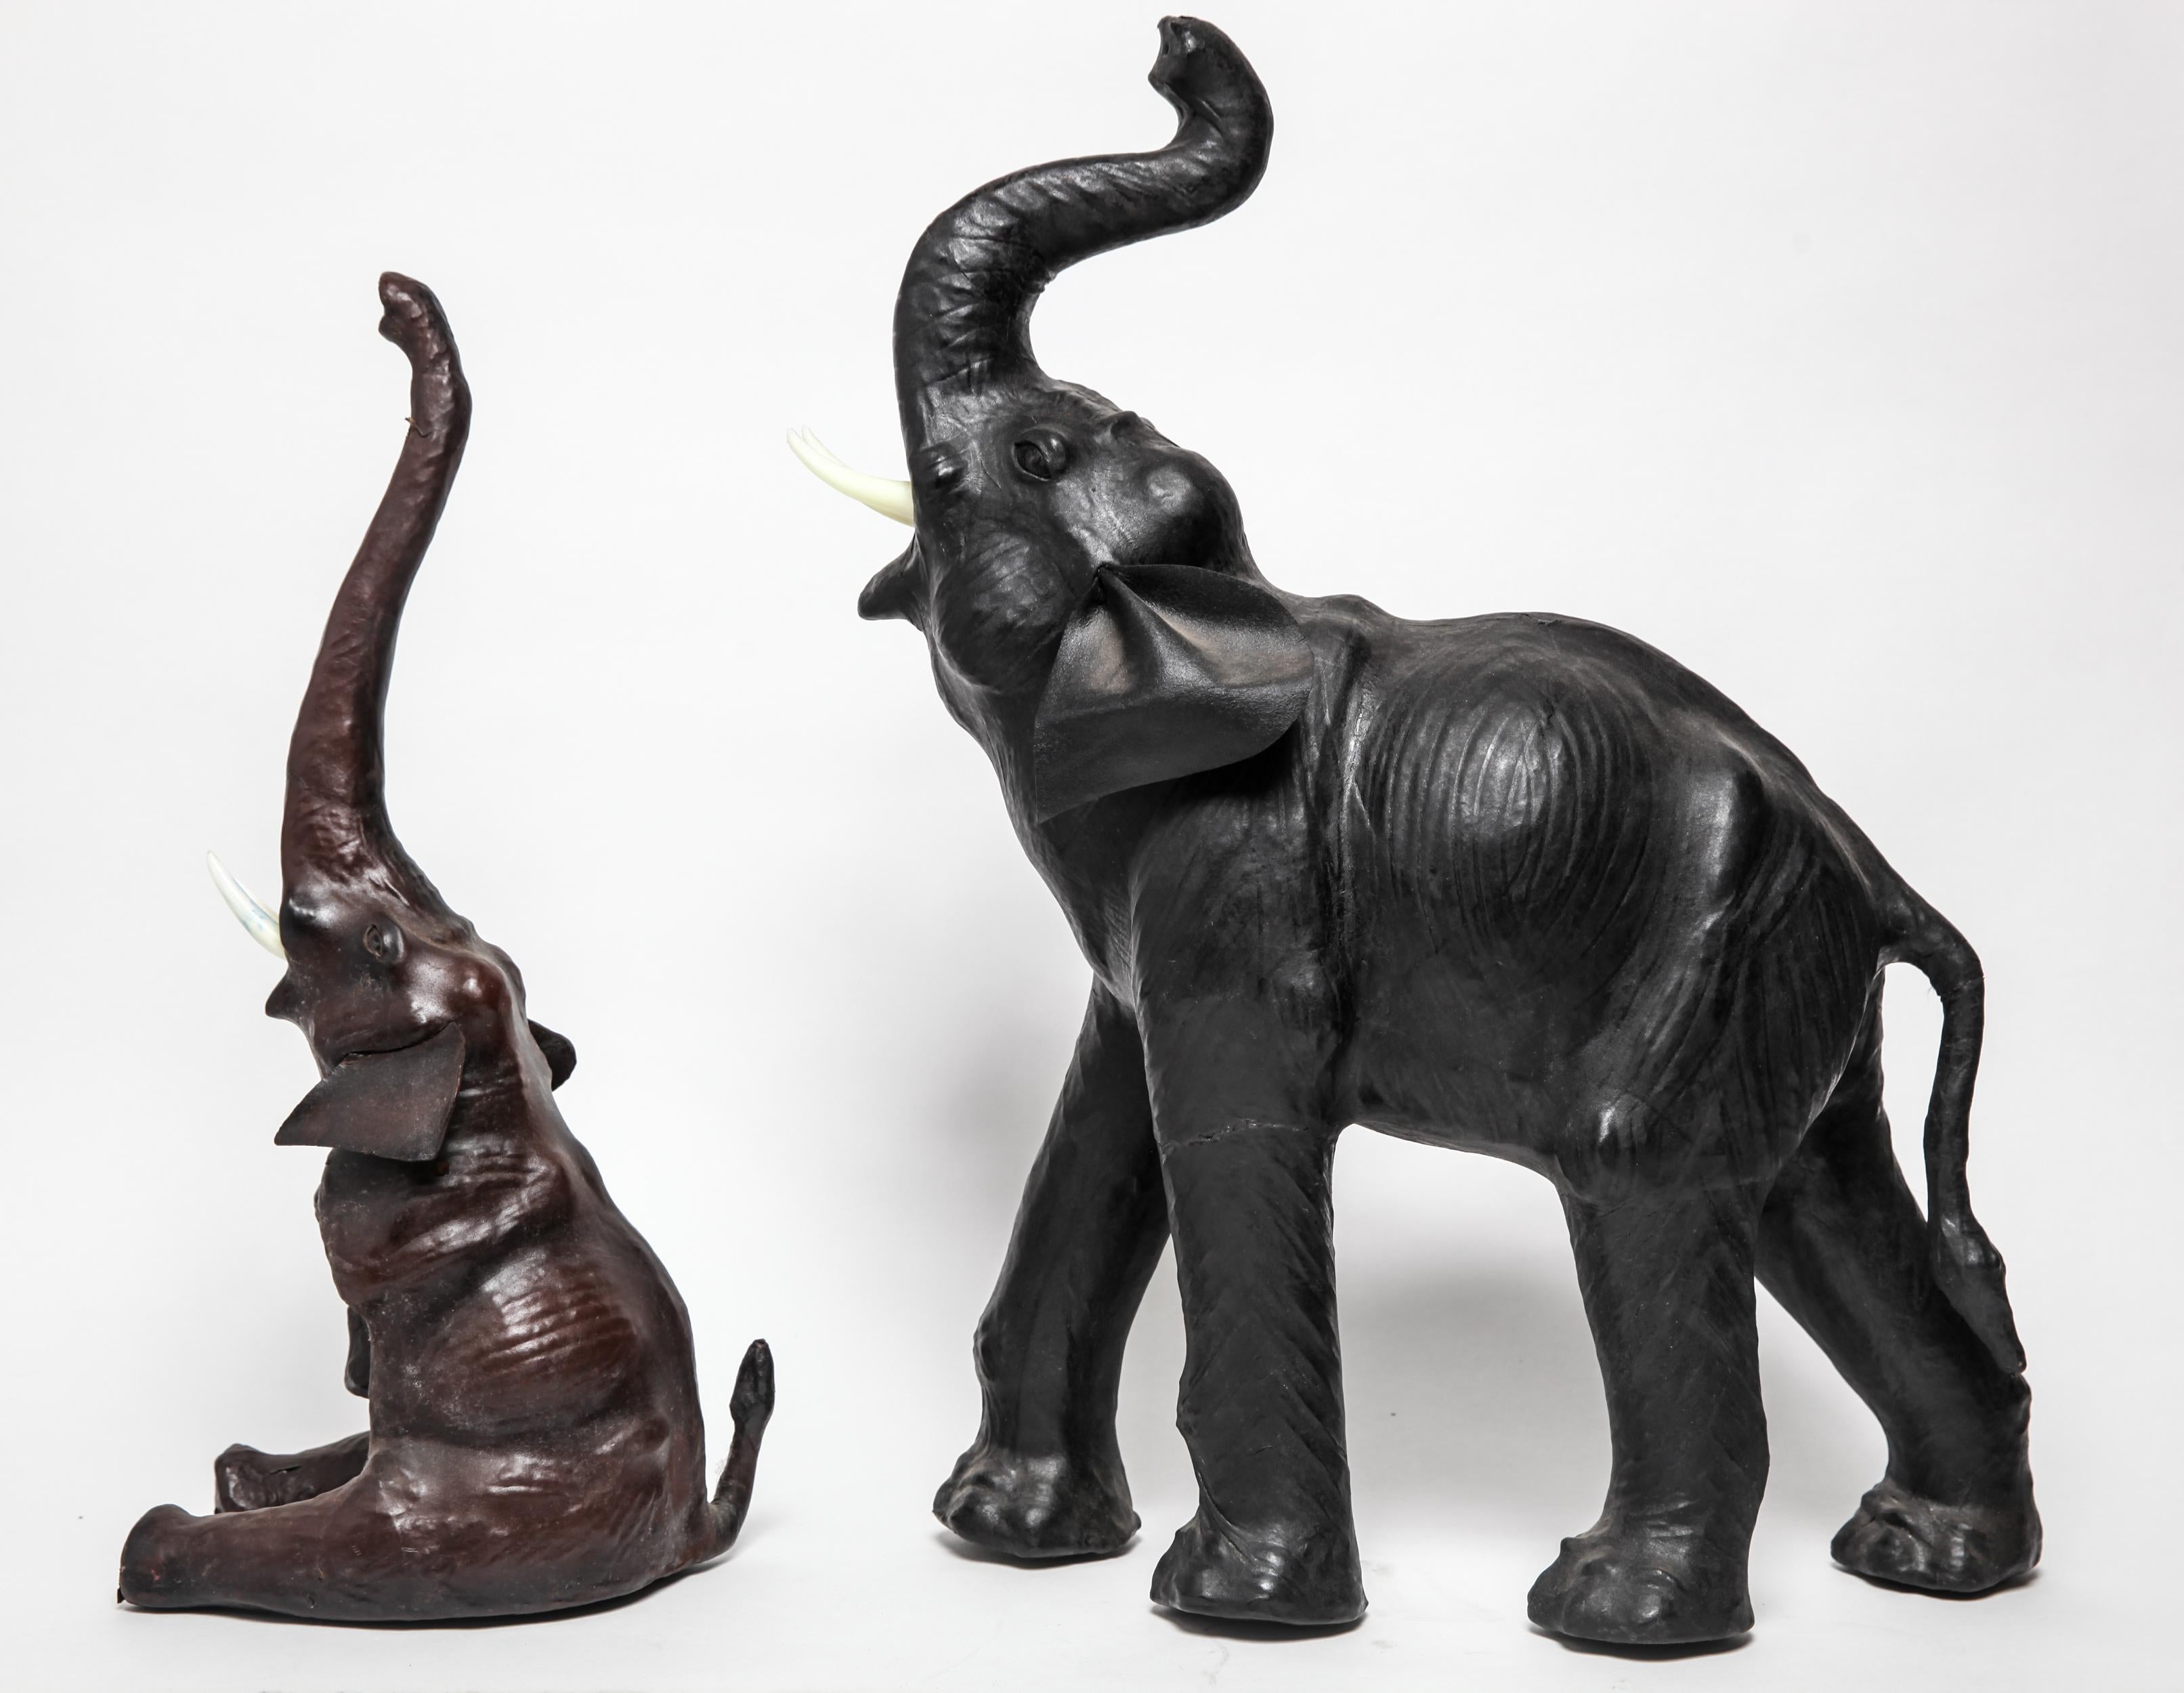 Modern pair of elephant sculptures, one standing and the other seated, both leather clad, with glass eyes and white plastic tusks. The pair is in great vintage condition with some minimal age-appropriate wear to the bottoms.